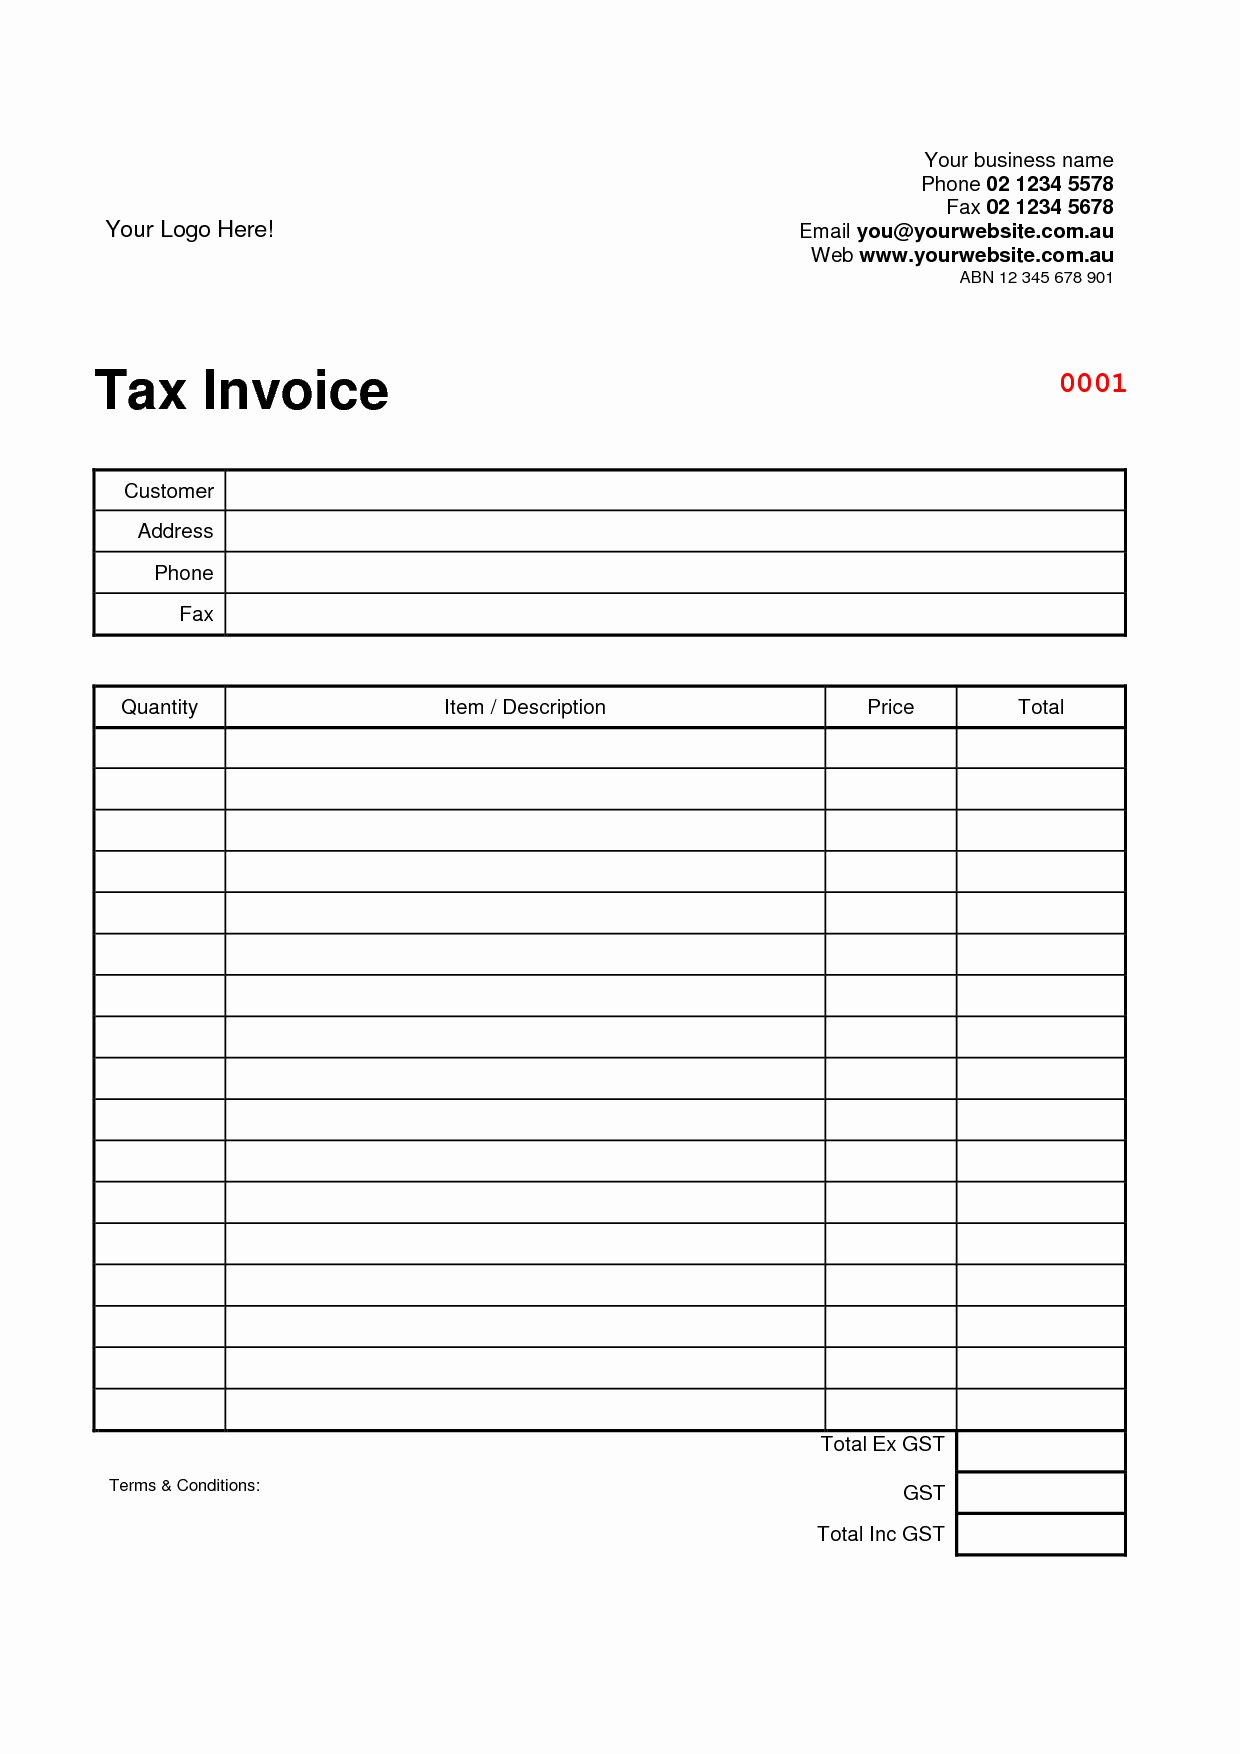 Invoice Spreadsheet Template Free Lovely Australian Tax Invoice Template Excel